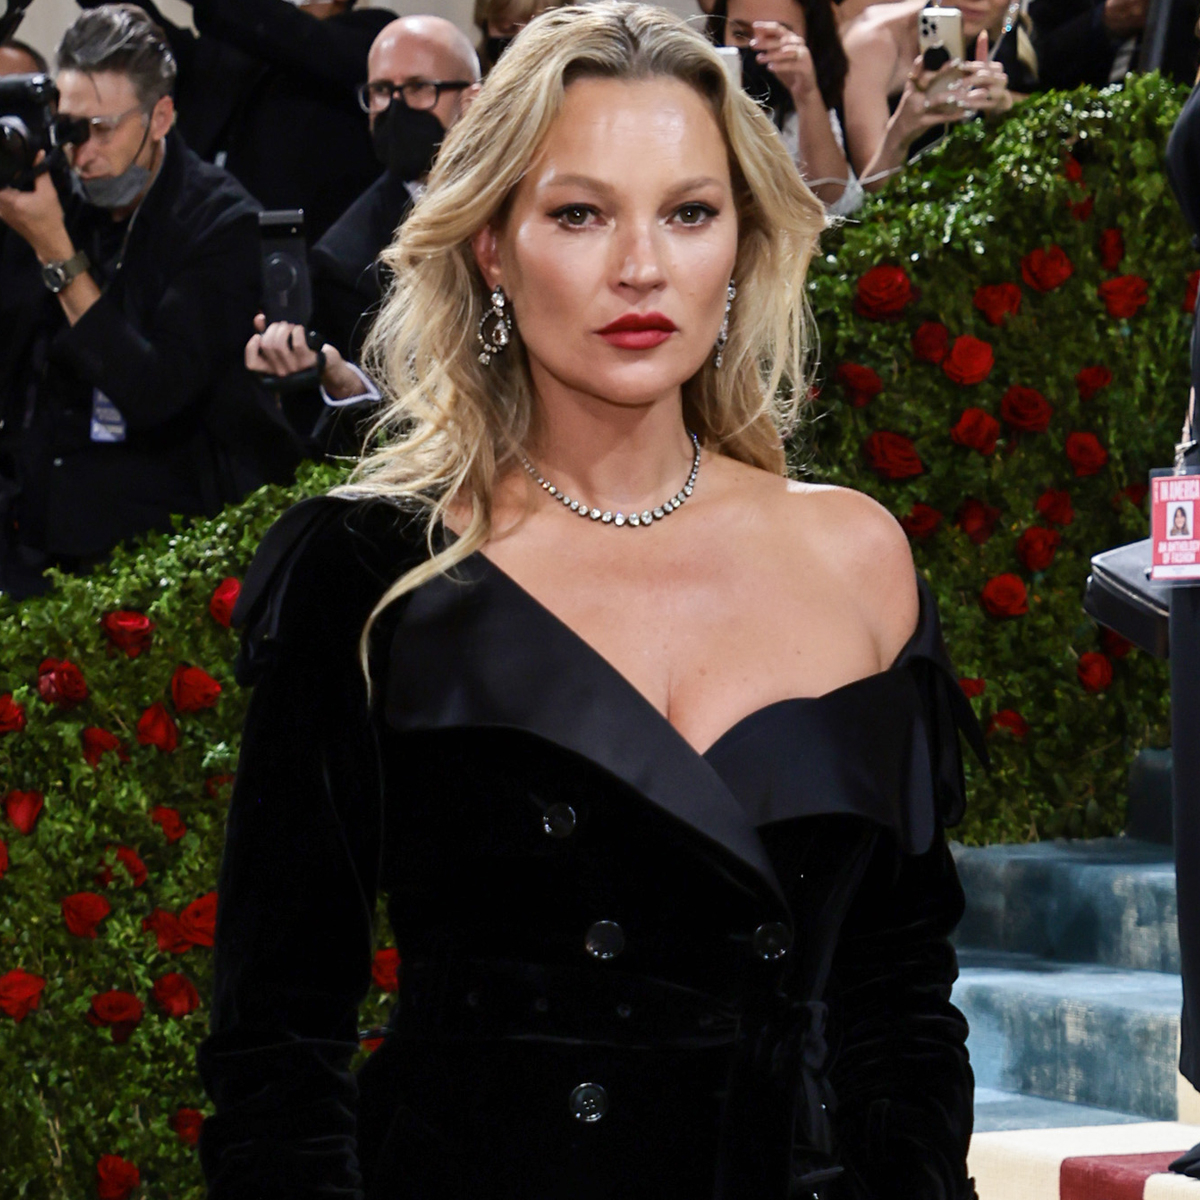 Kate Moss Reveals Why She’s in “Denial” About Turning 50